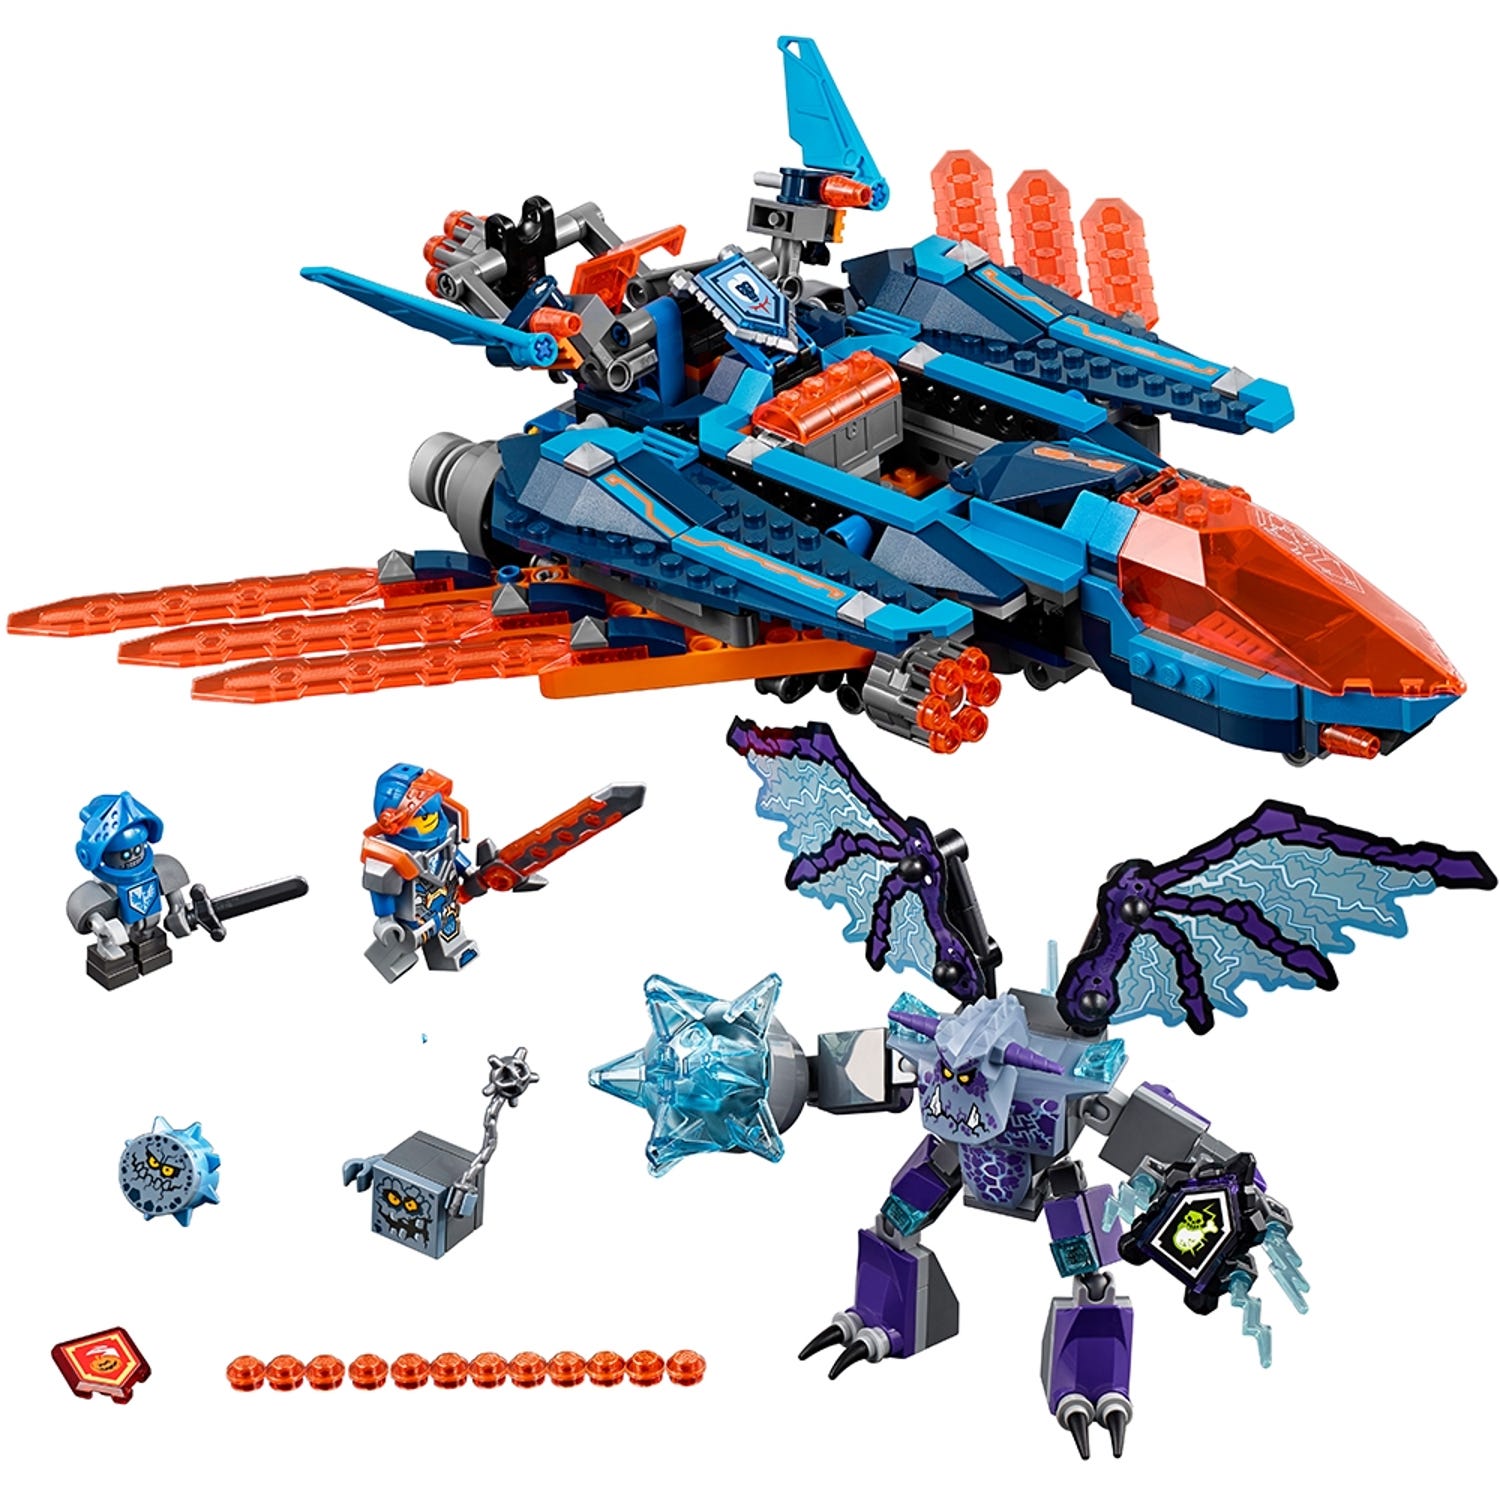 Clay's Fighter 70351 NEXO KNIGHTS™ | Buy online at the Official LEGO® Shop US